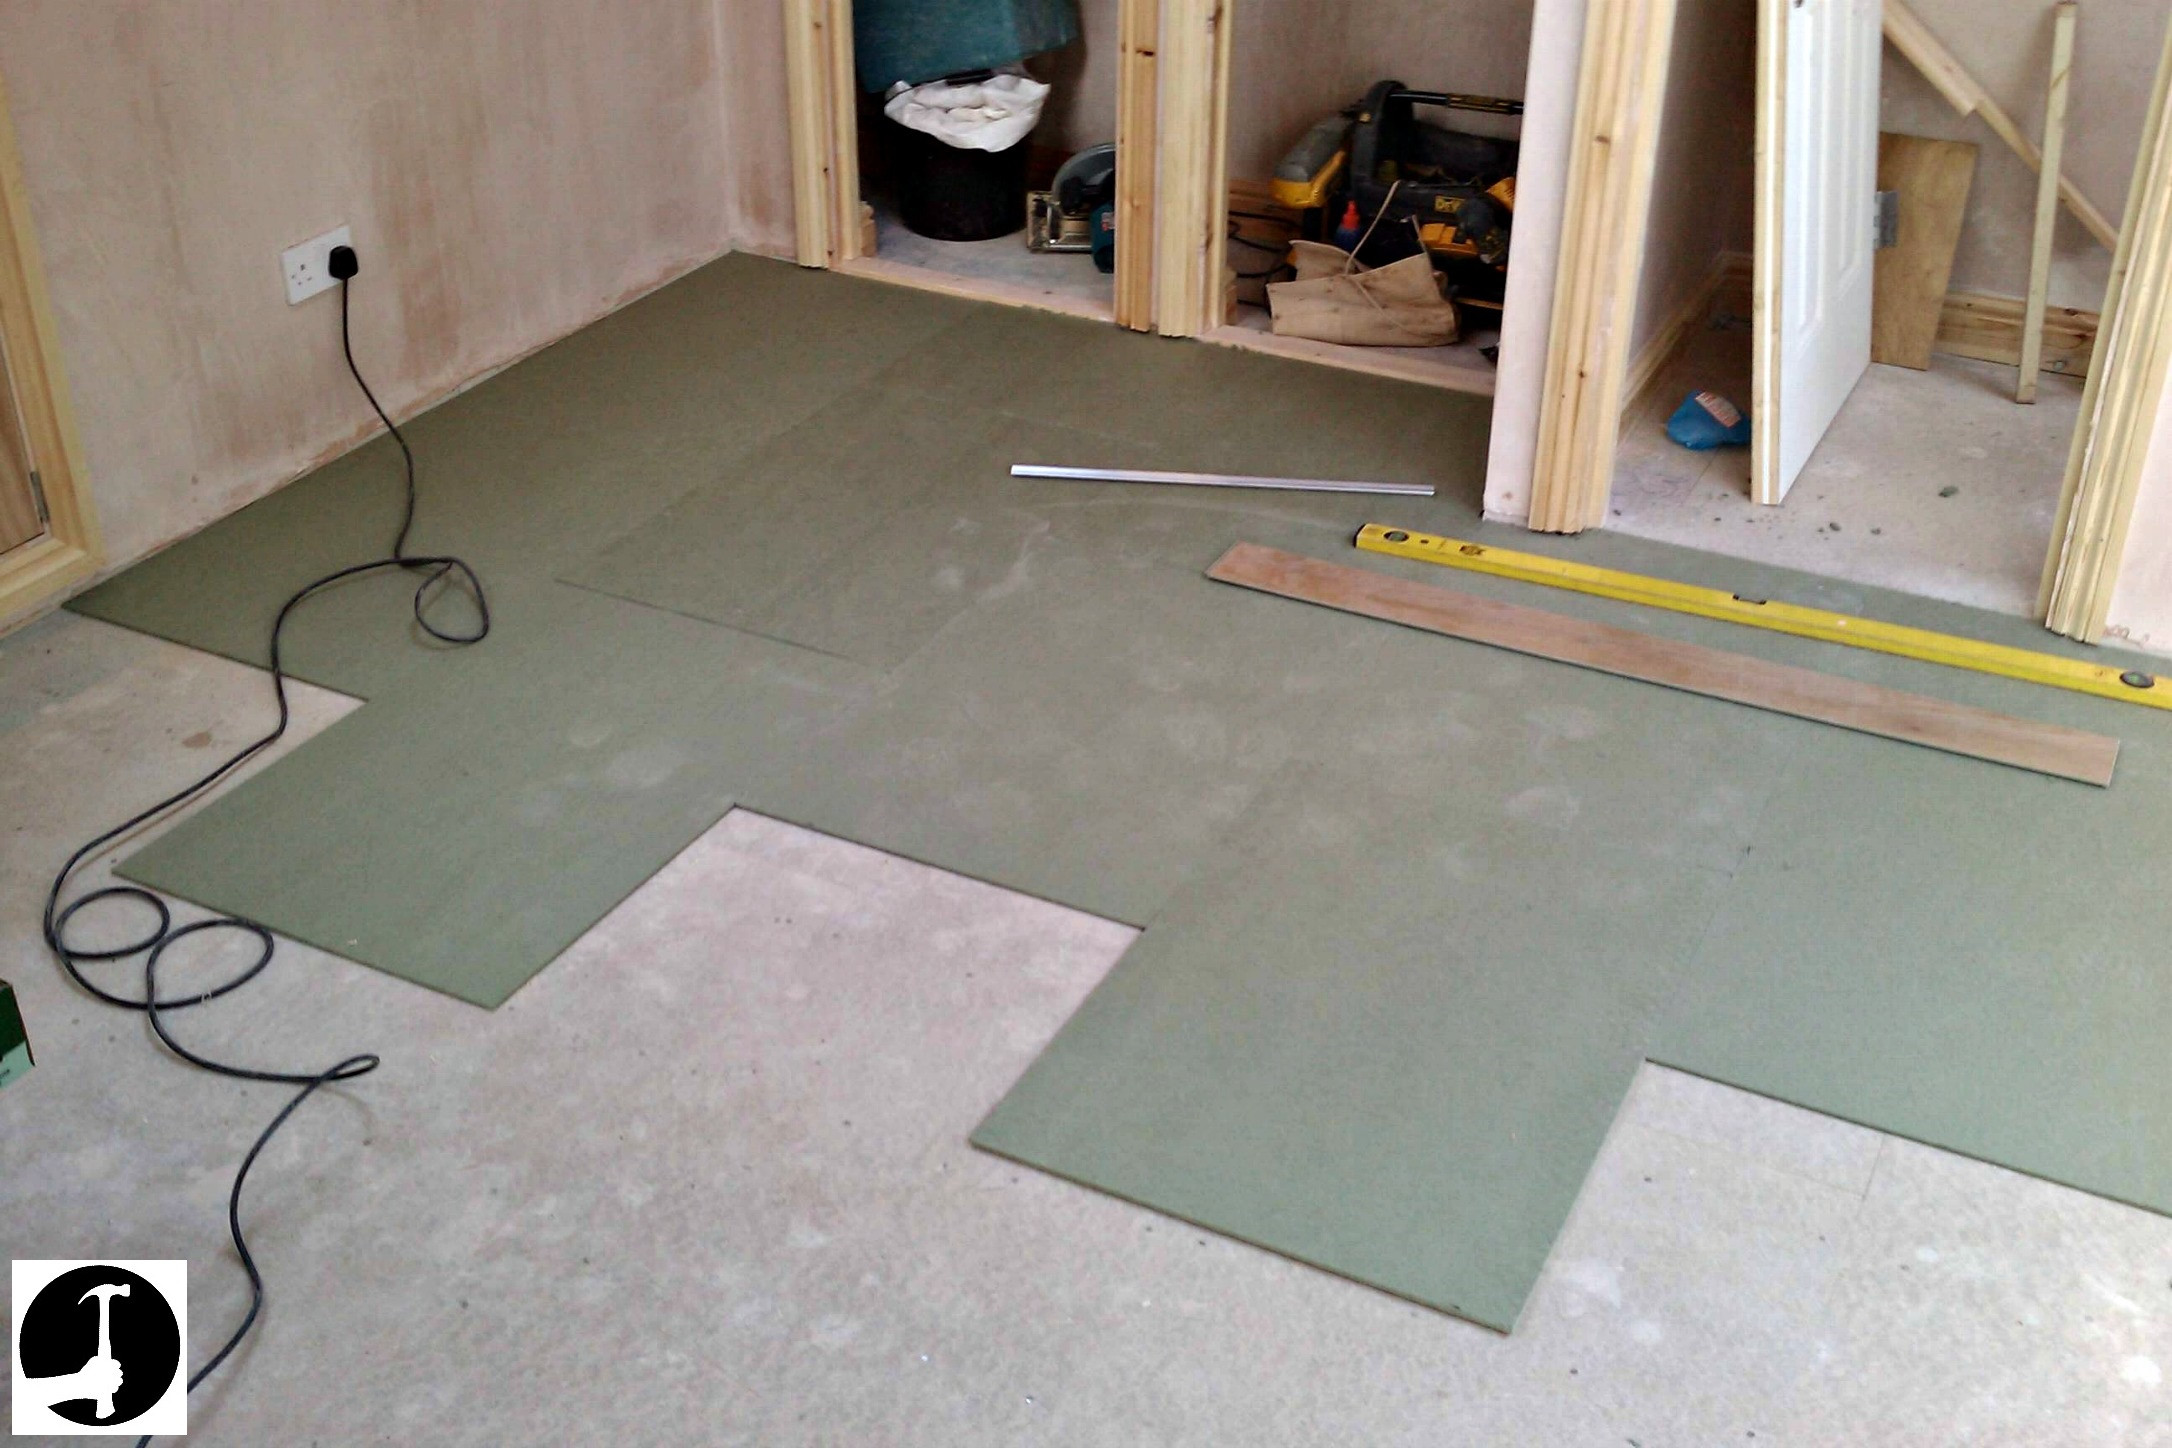 Diy Hardwood Floor Installation On Concrete Of How to Install Laminate Flooring with Ease Glued Glue Less Systems Intended for Laminate Underlay